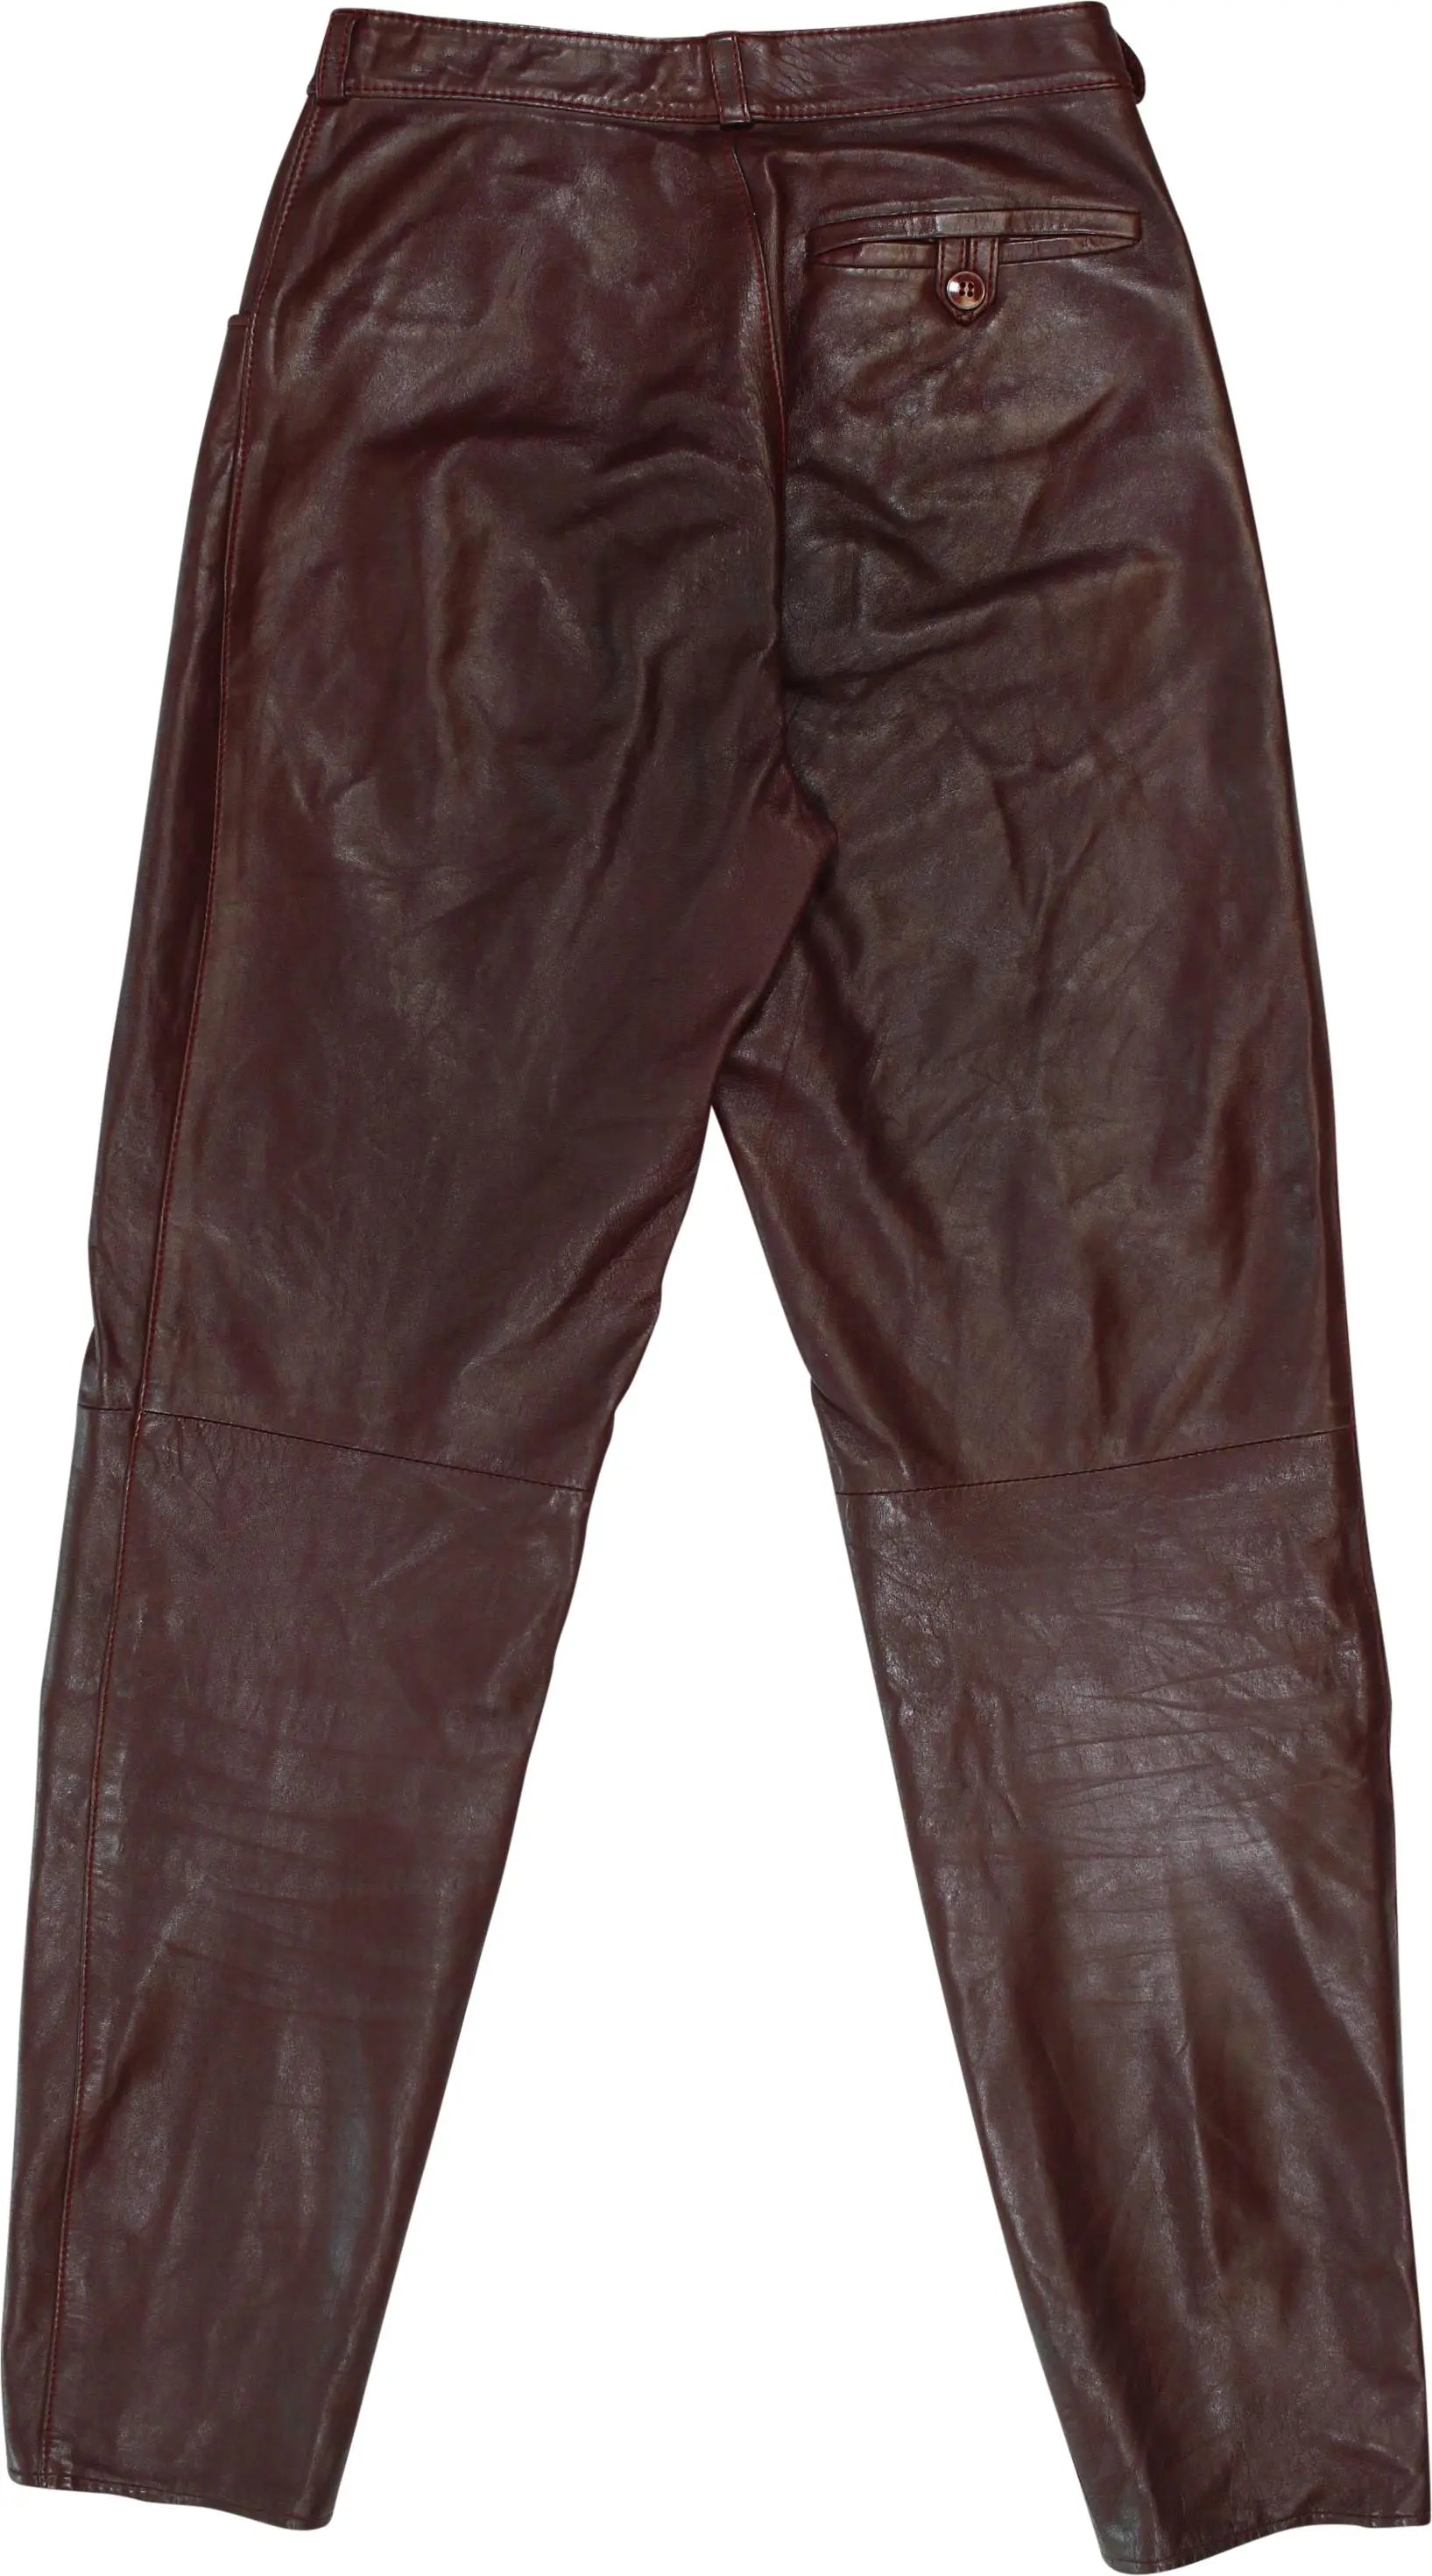 Goldmark - Red Leather Pants- ThriftTale.com - Vintage and second handclothing